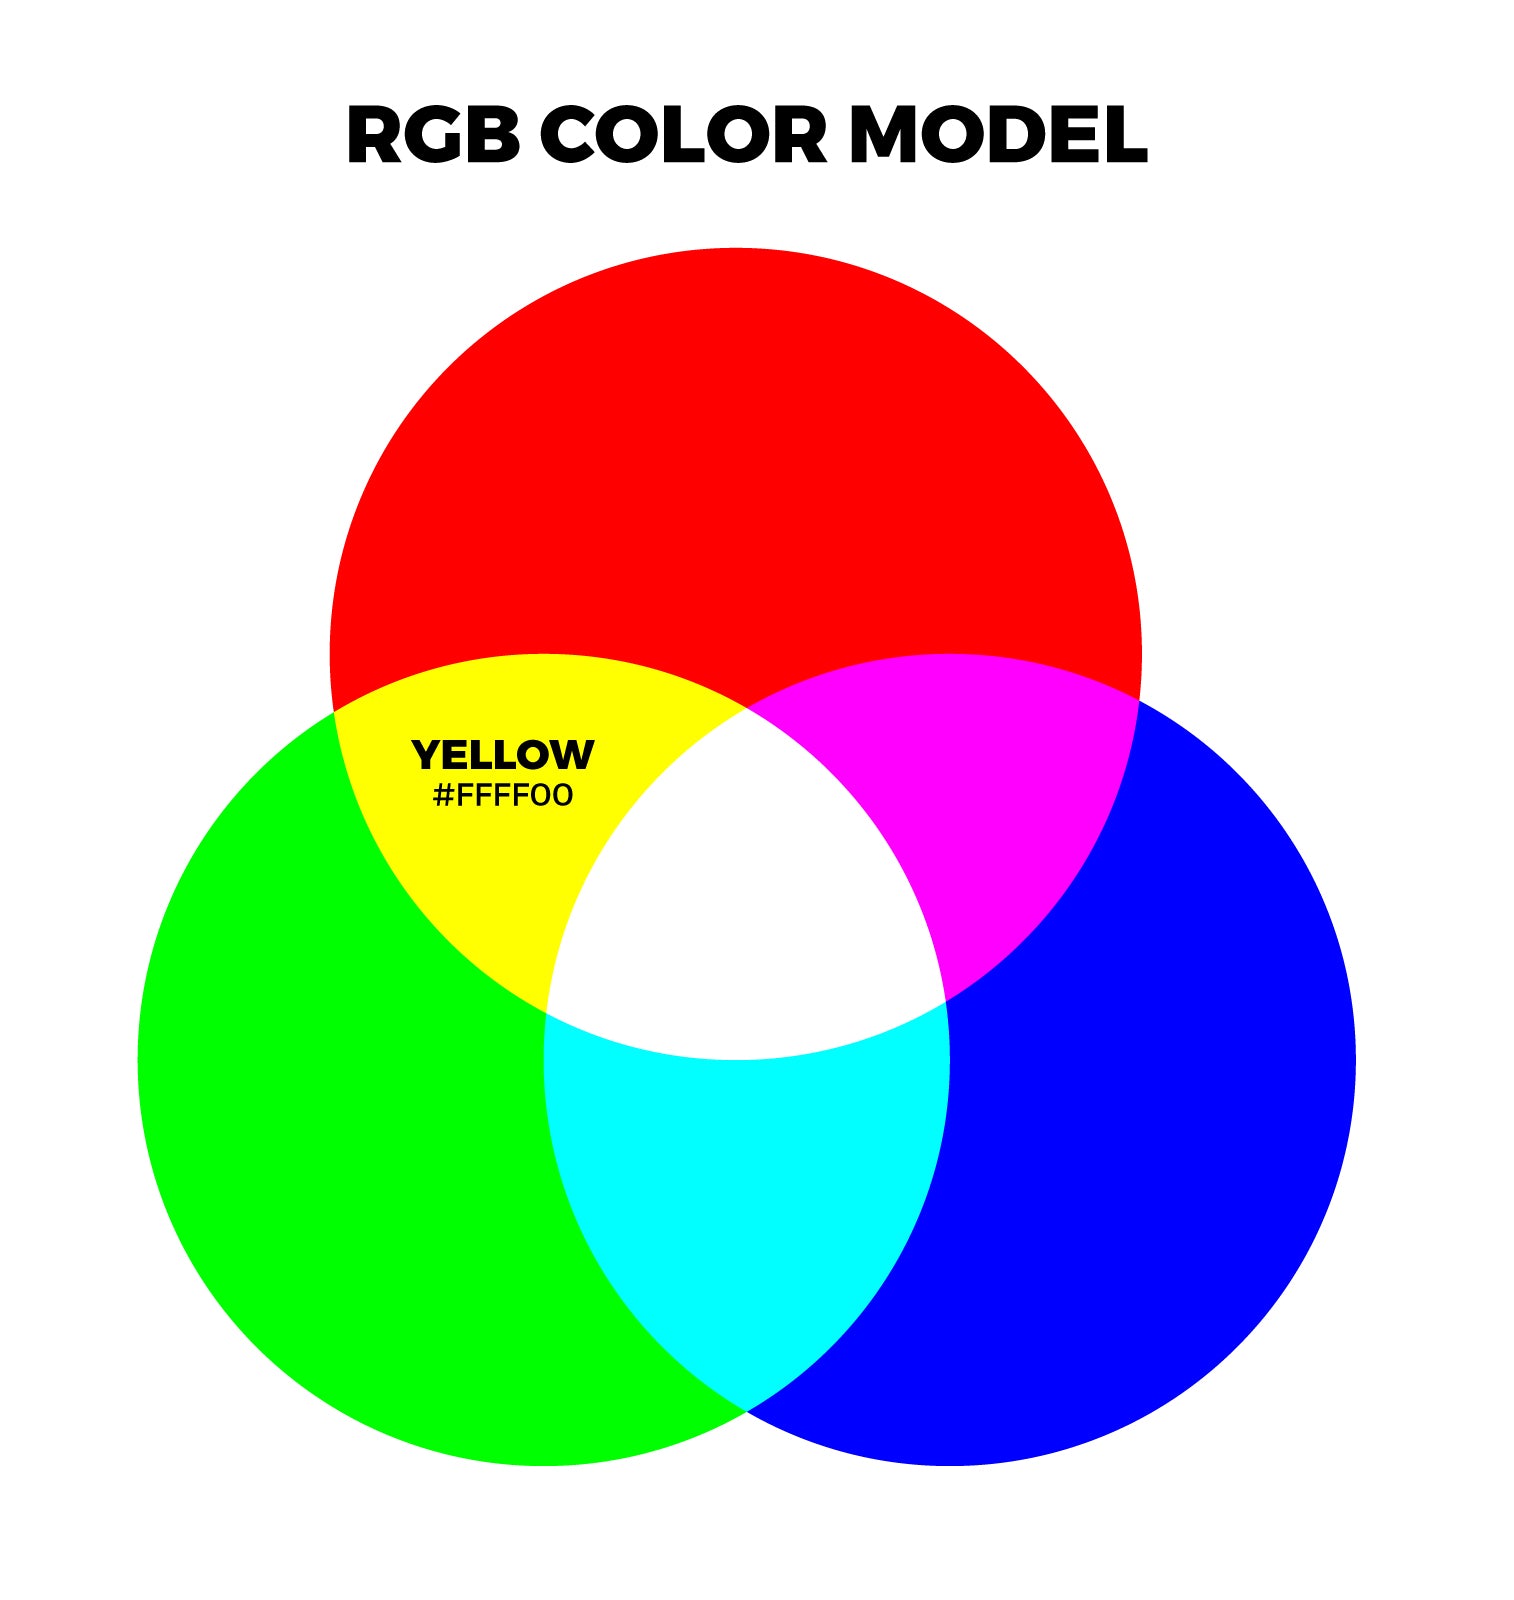 What-Color-Does-Red-and-Green-Make-When-Mixed-with-Lights-Additive-RGB-Color-Model